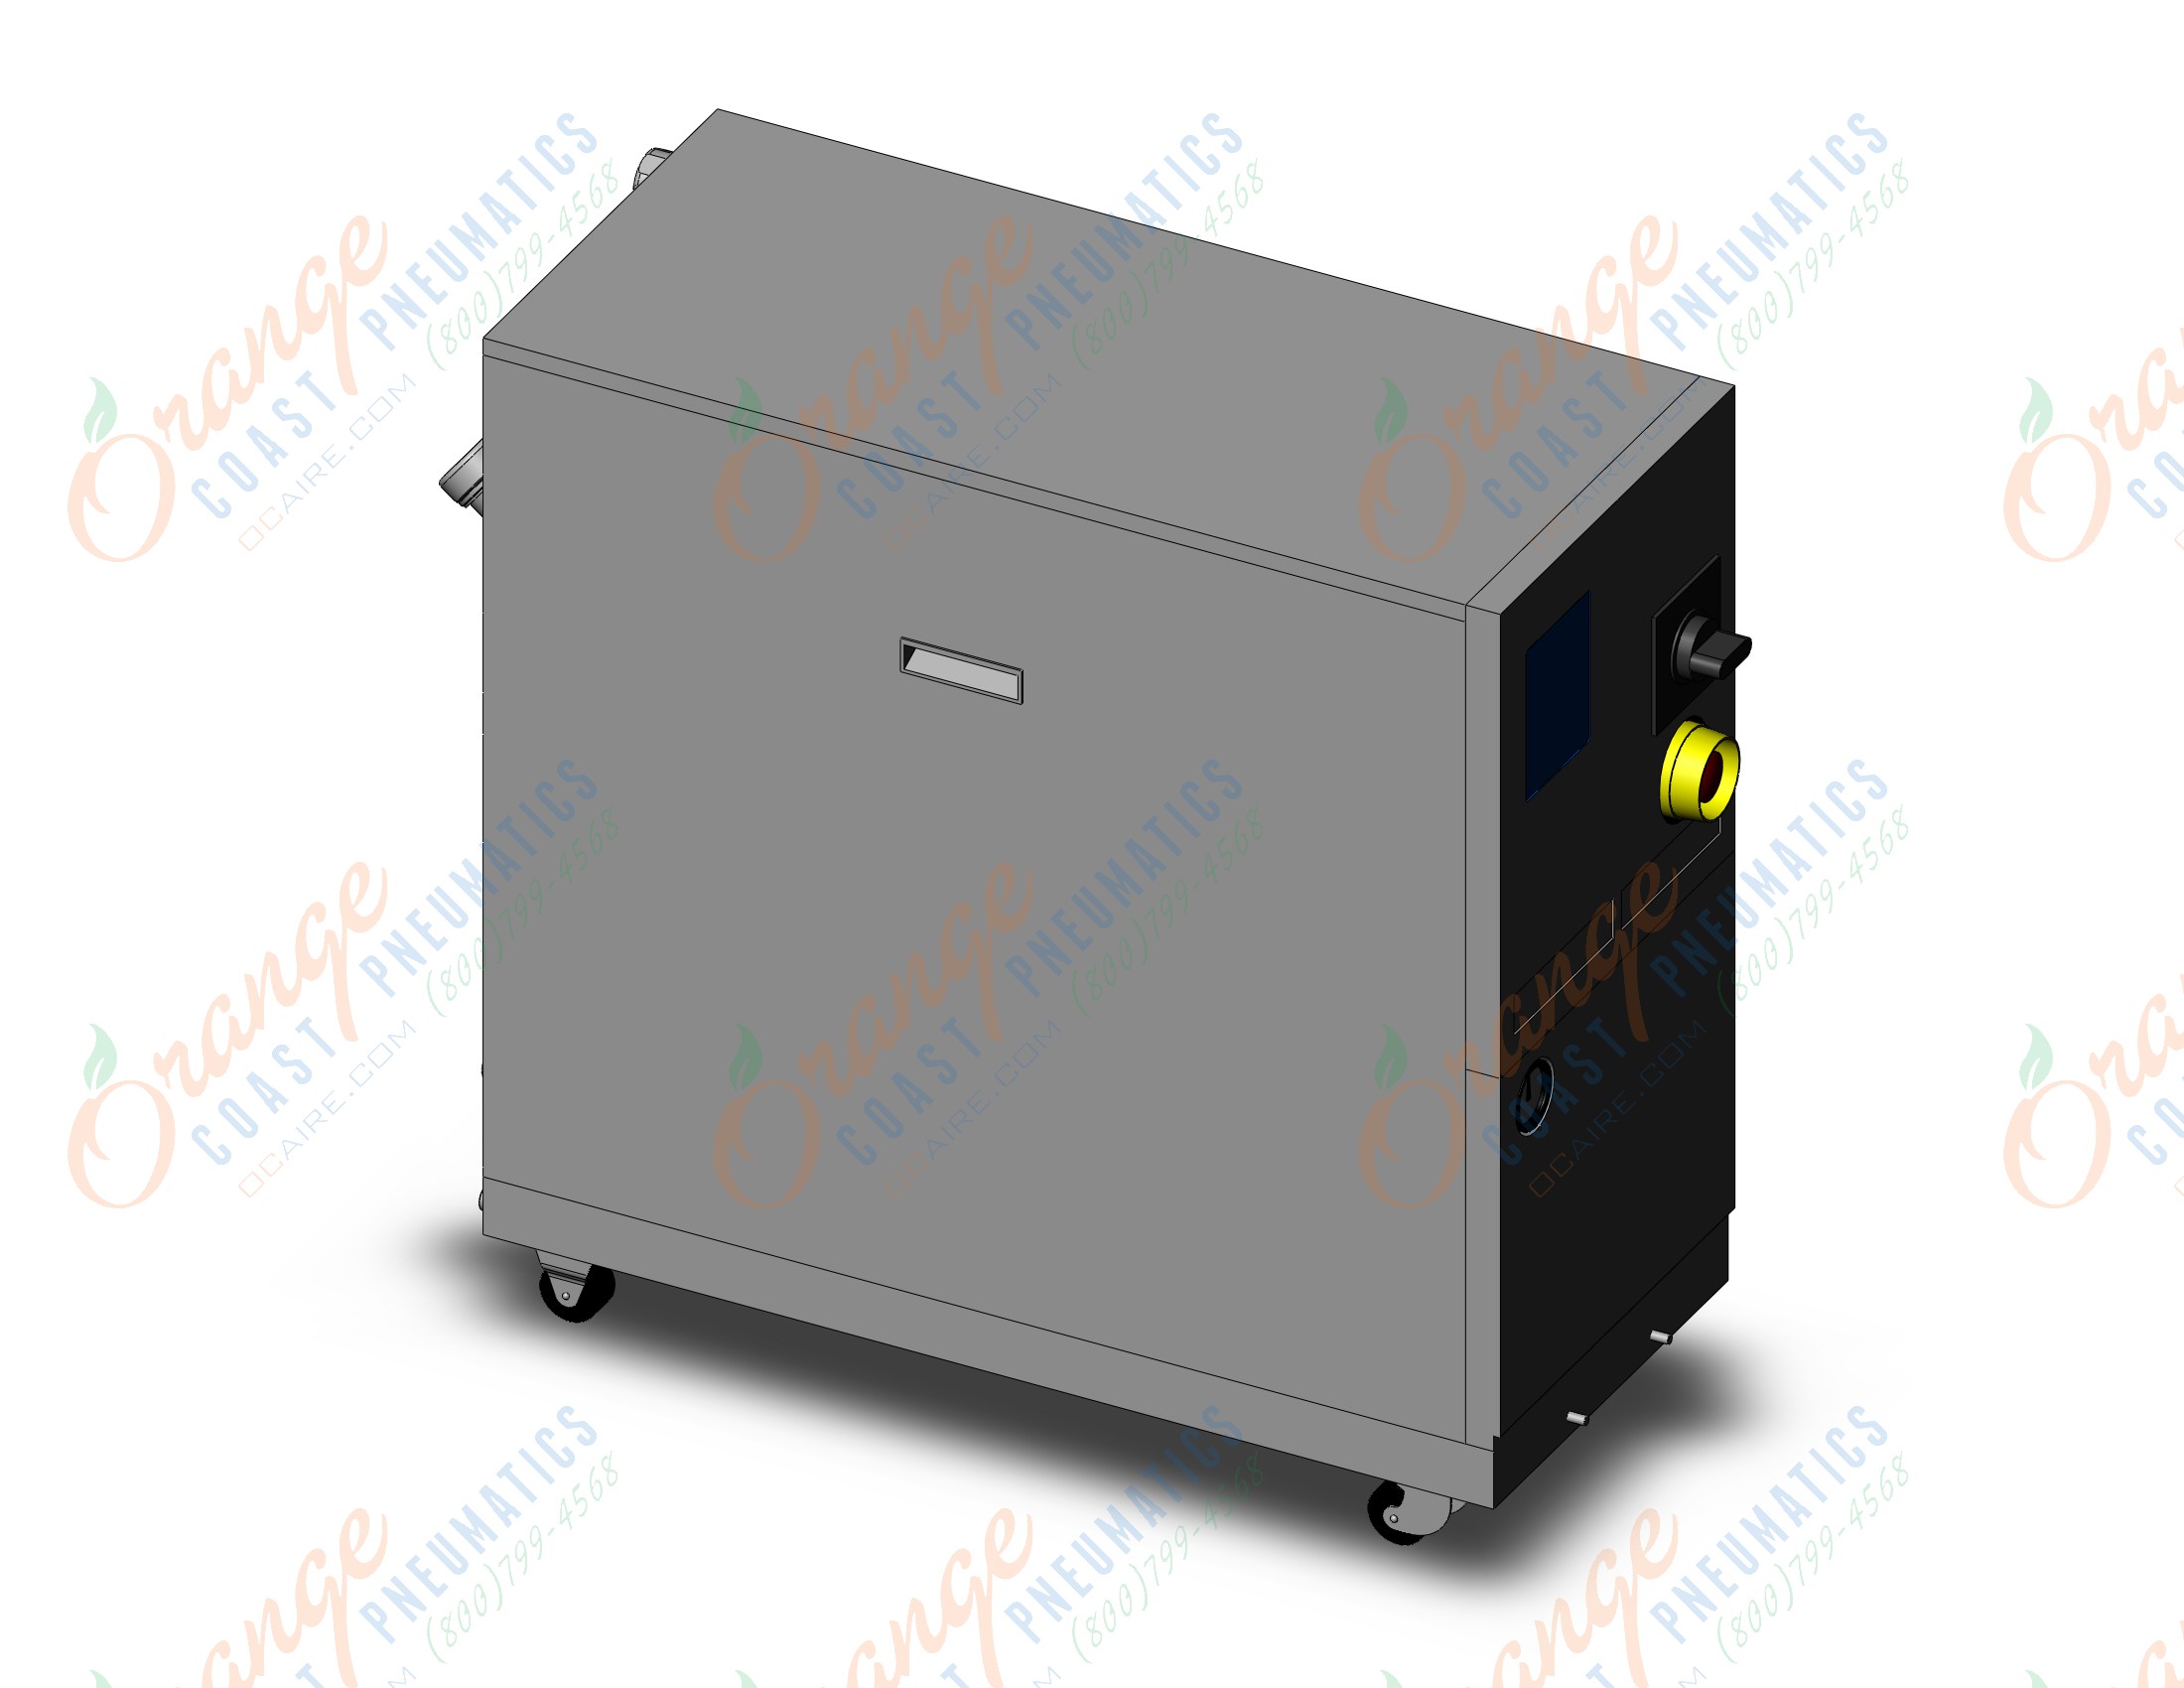 SMC HRZ008-L1-CN thermo chiller, HRZ- THERMO CHILLER***